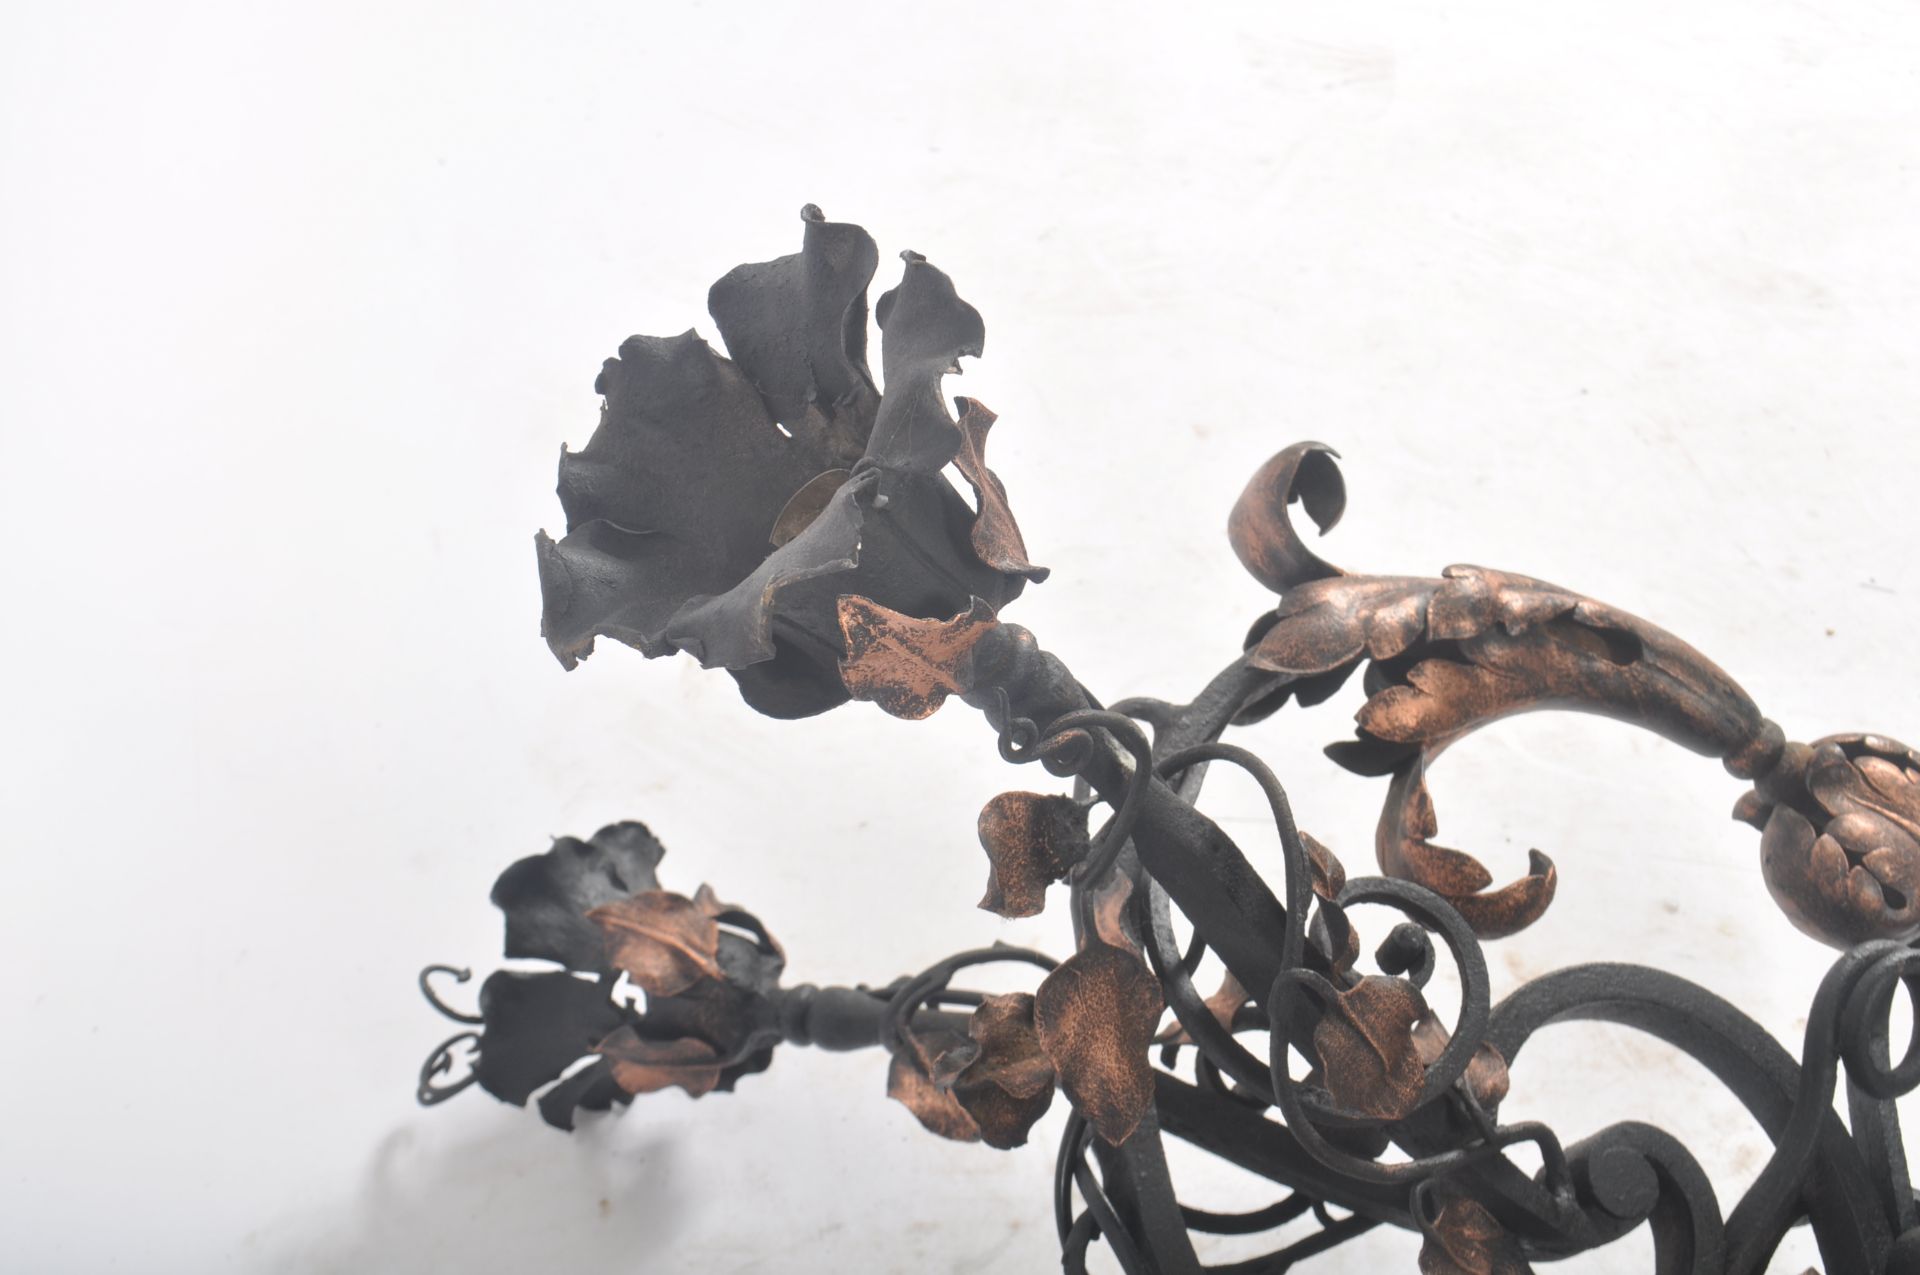 PAIR OF ARTS & CRAFTS MANNER WROUGHT IRON & COPPER WALL LIGHTS - Image 5 of 8